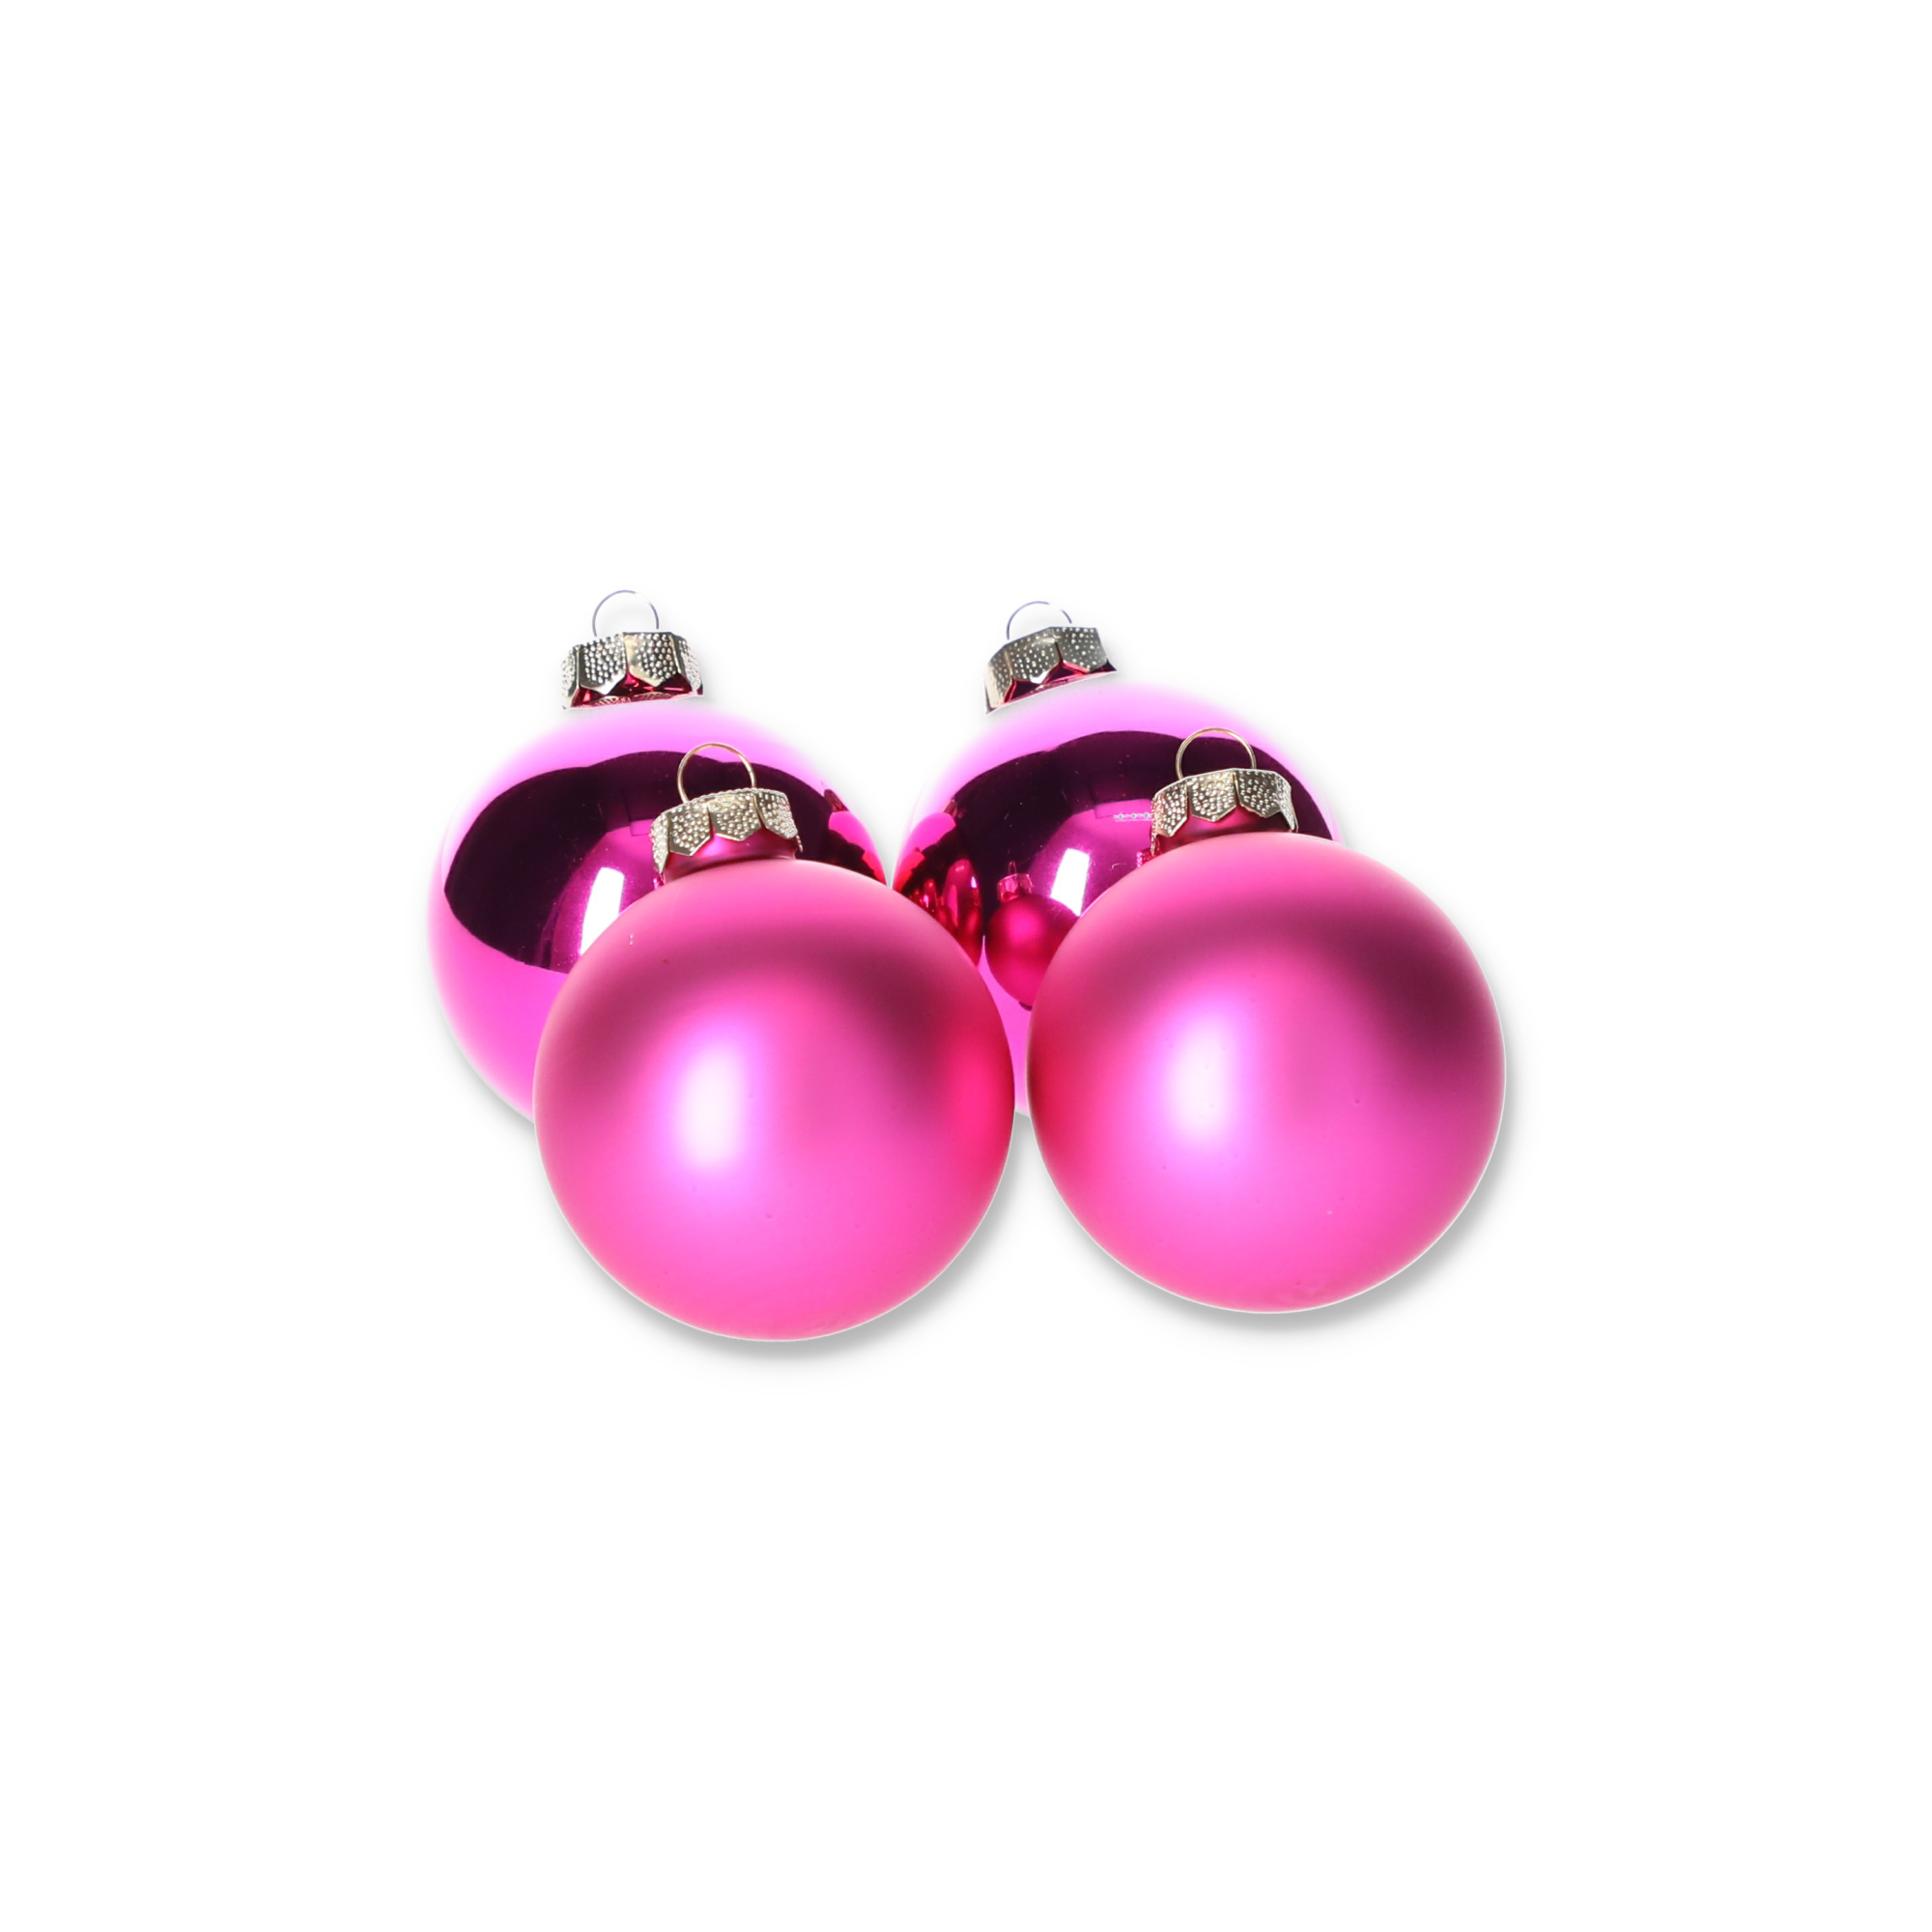 Christbaumkugeln pink Ø 4,5 cm, 28-teilig + product picture